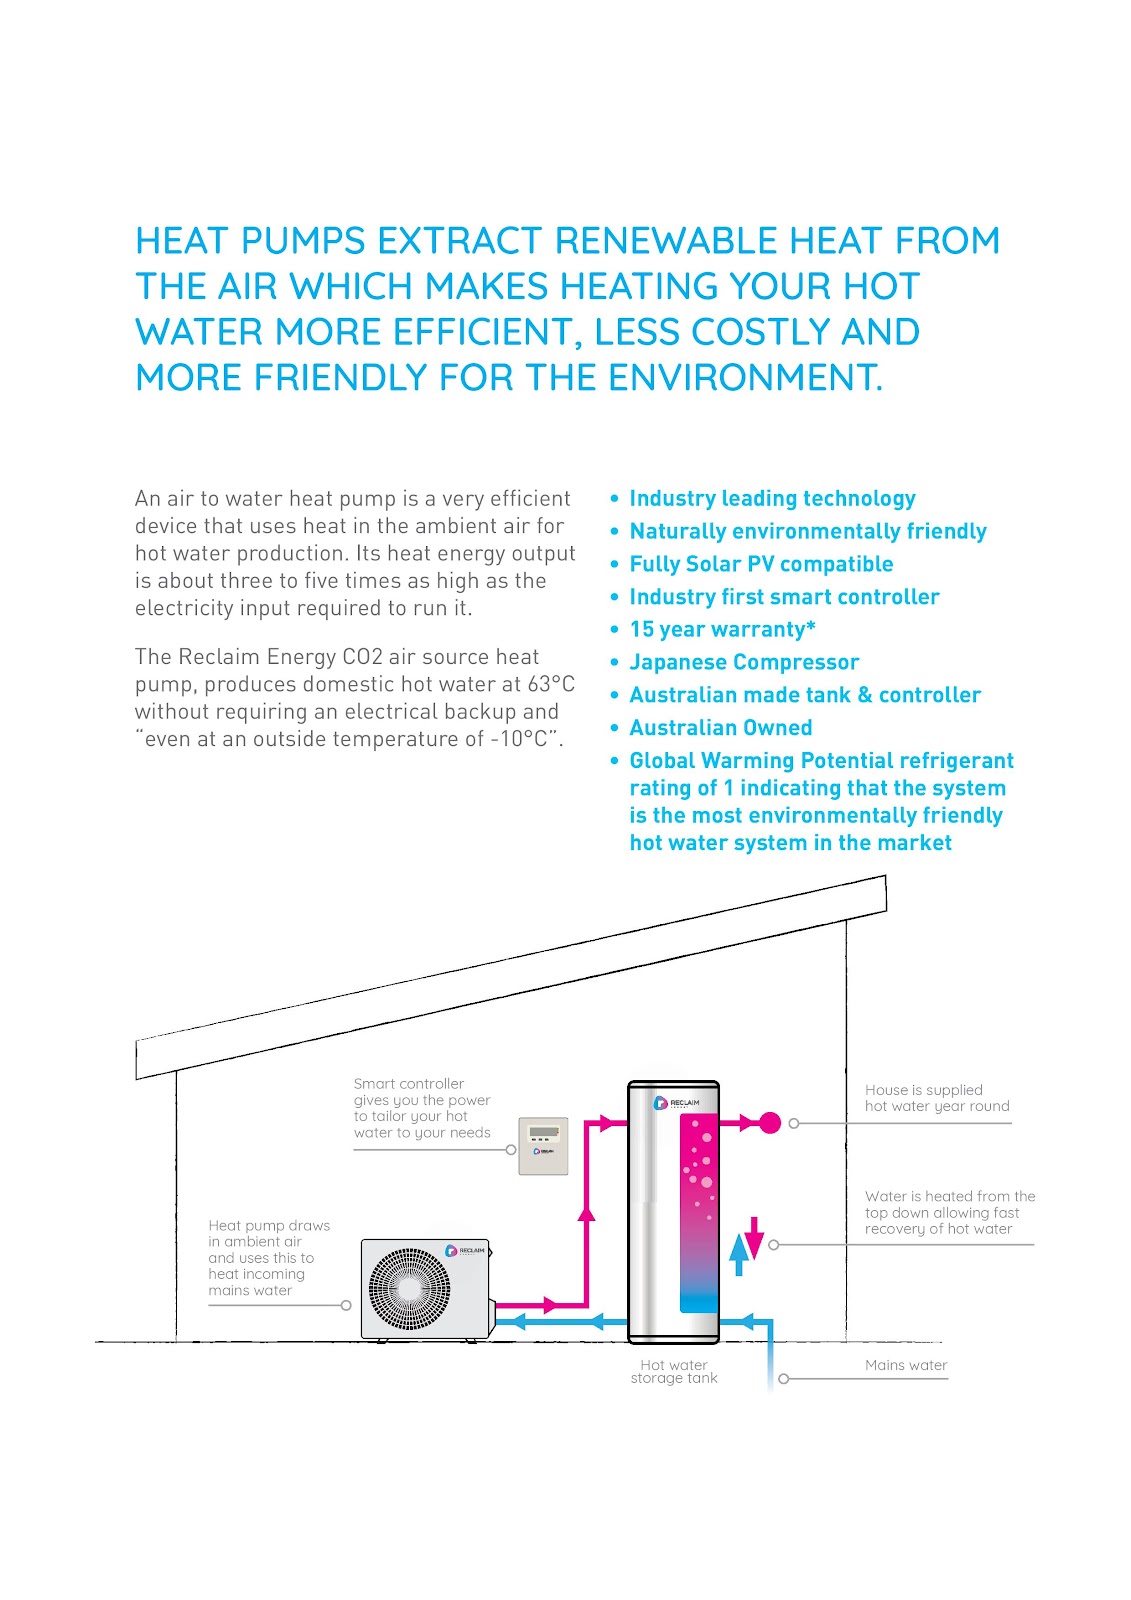 Heat pumps extract renewble heat from the air which make heating your hot water more efficient